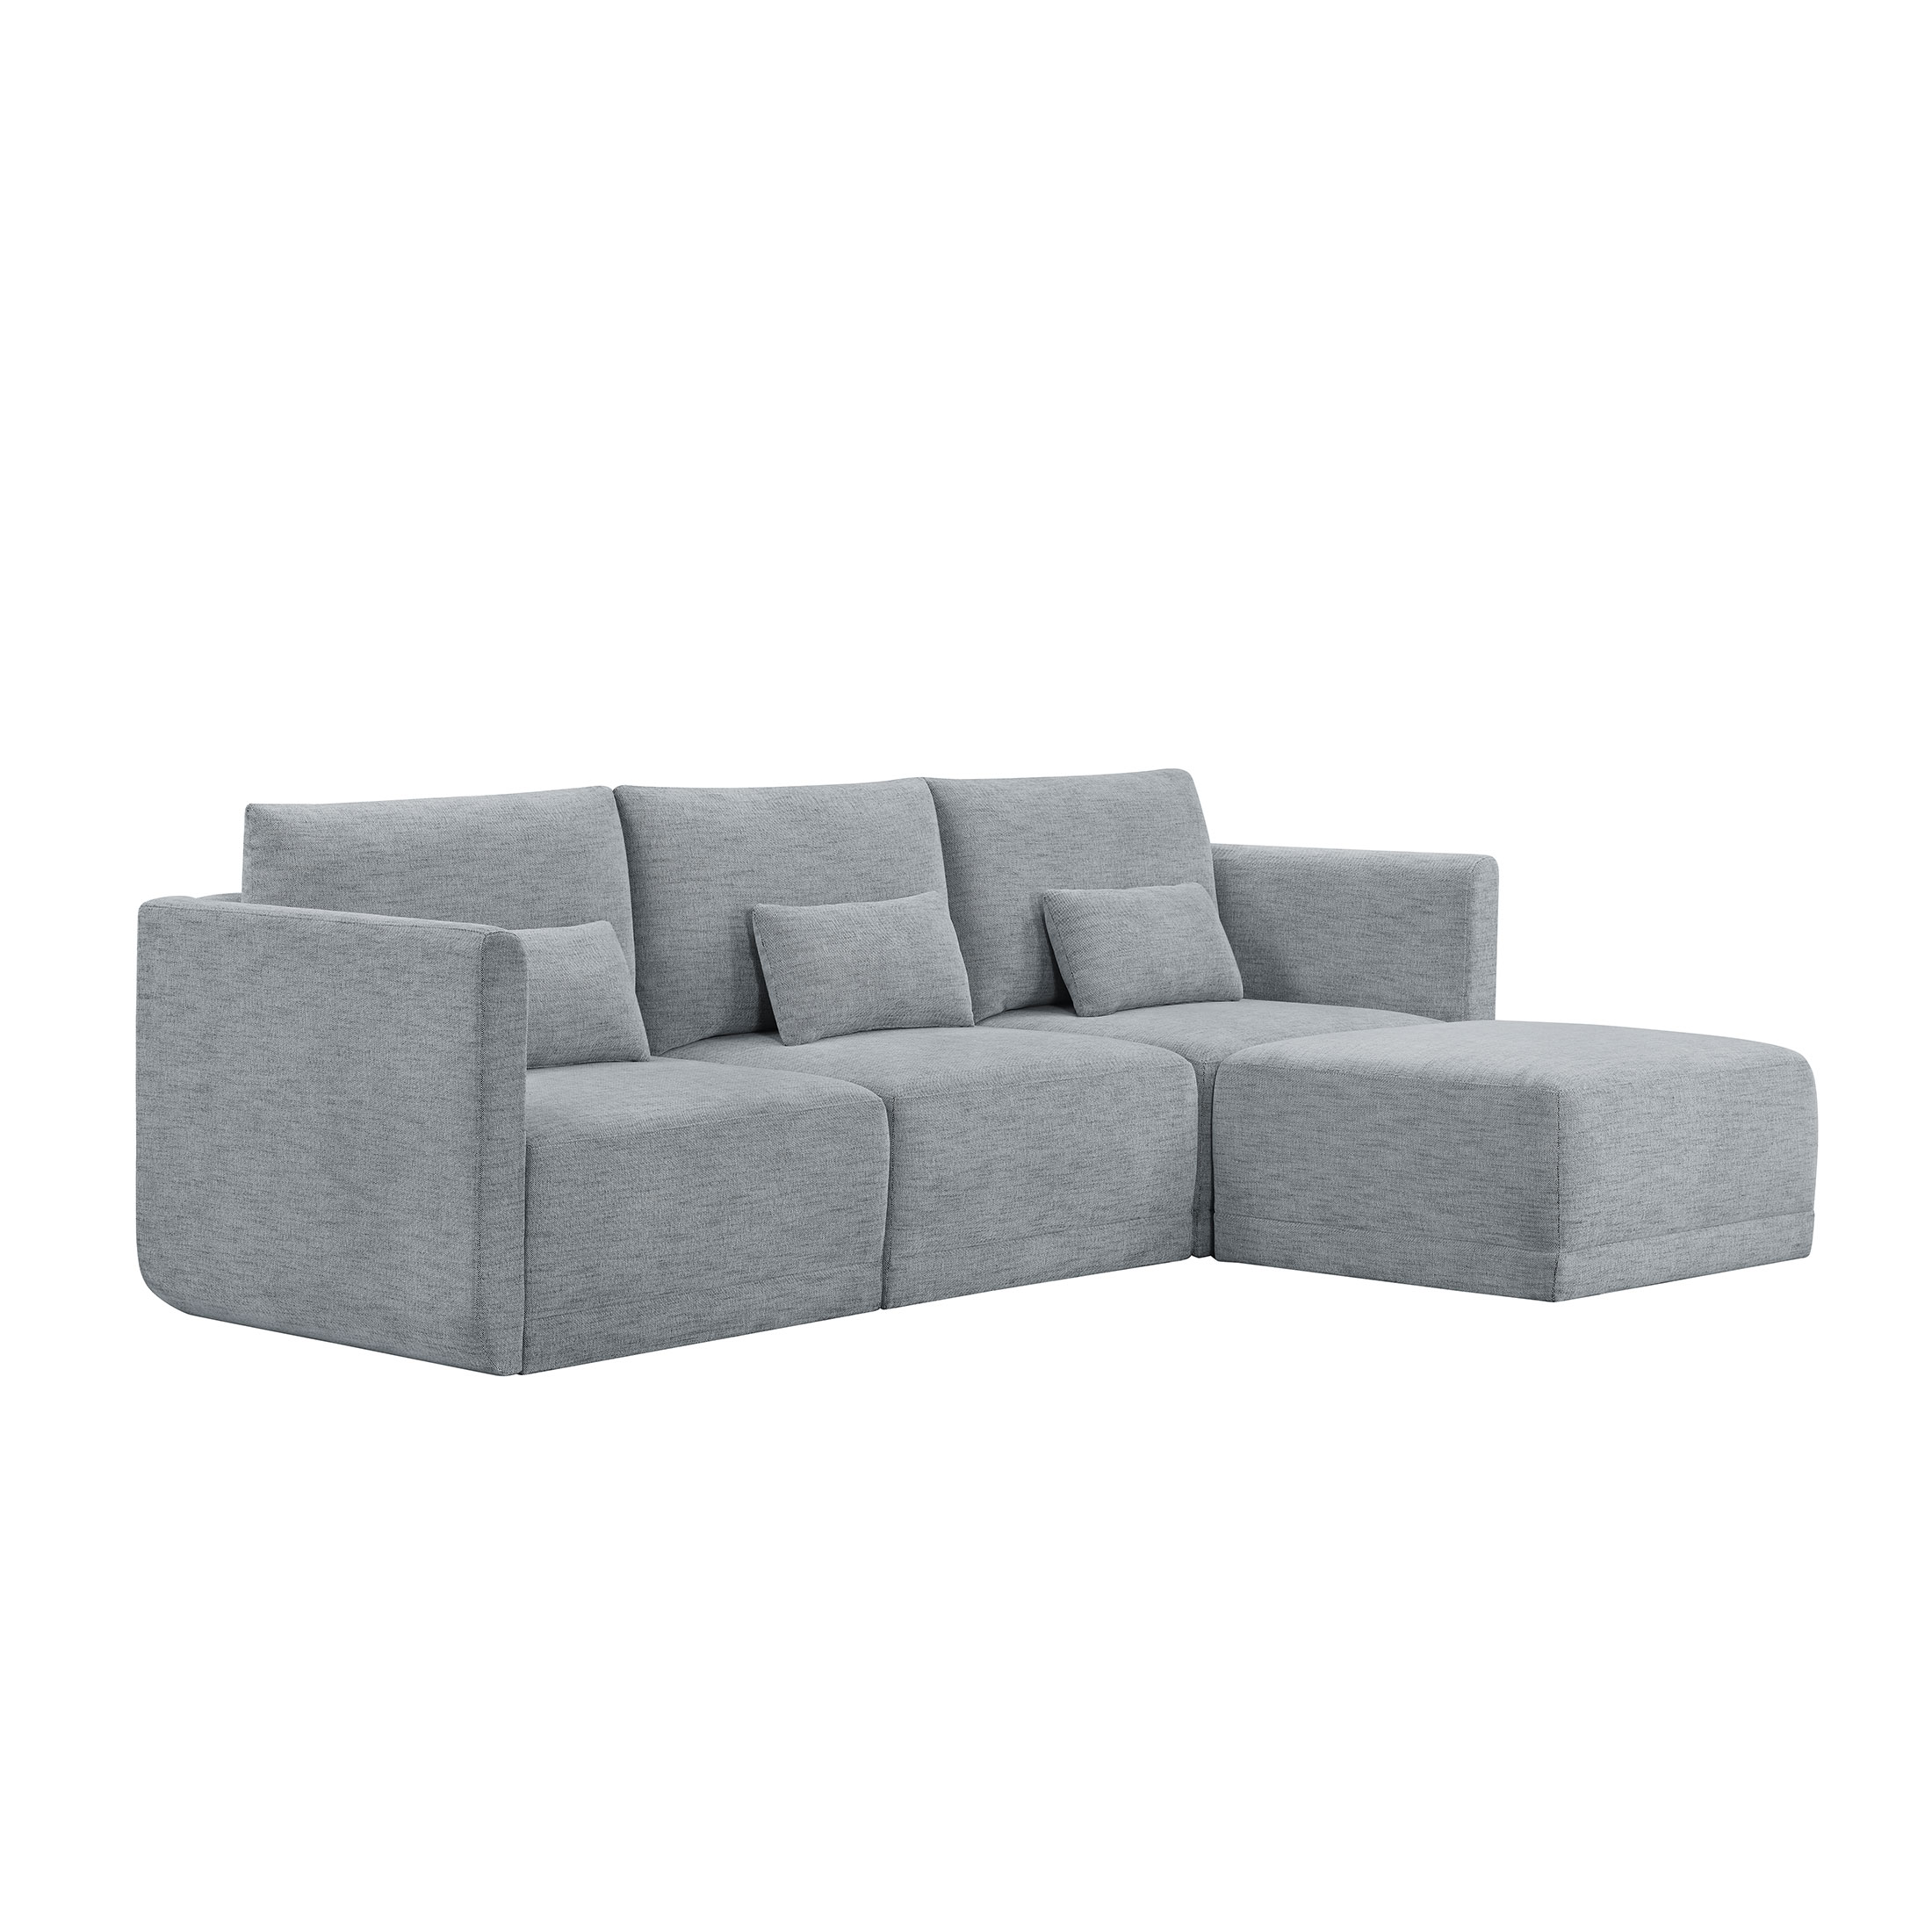 Beautiful Drew Modular Sectional Sofa with Ottoman by Drew Barrymore, Gray Fabric - image 3 of 15